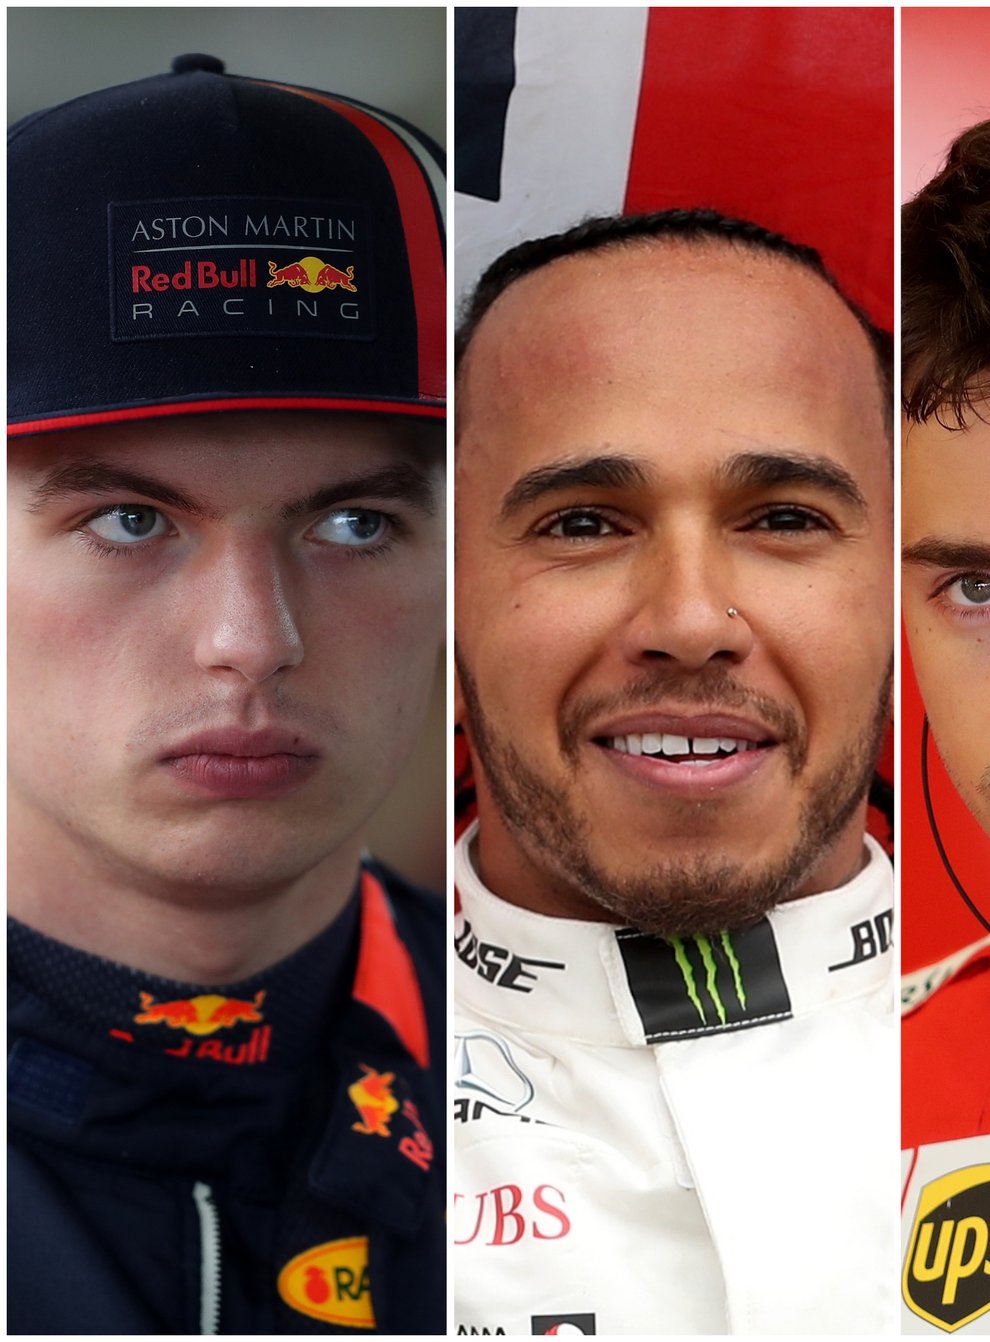 Max Verstappen, Lewis Hamilton and Charles Leclerc are among the contenders for the F1 title